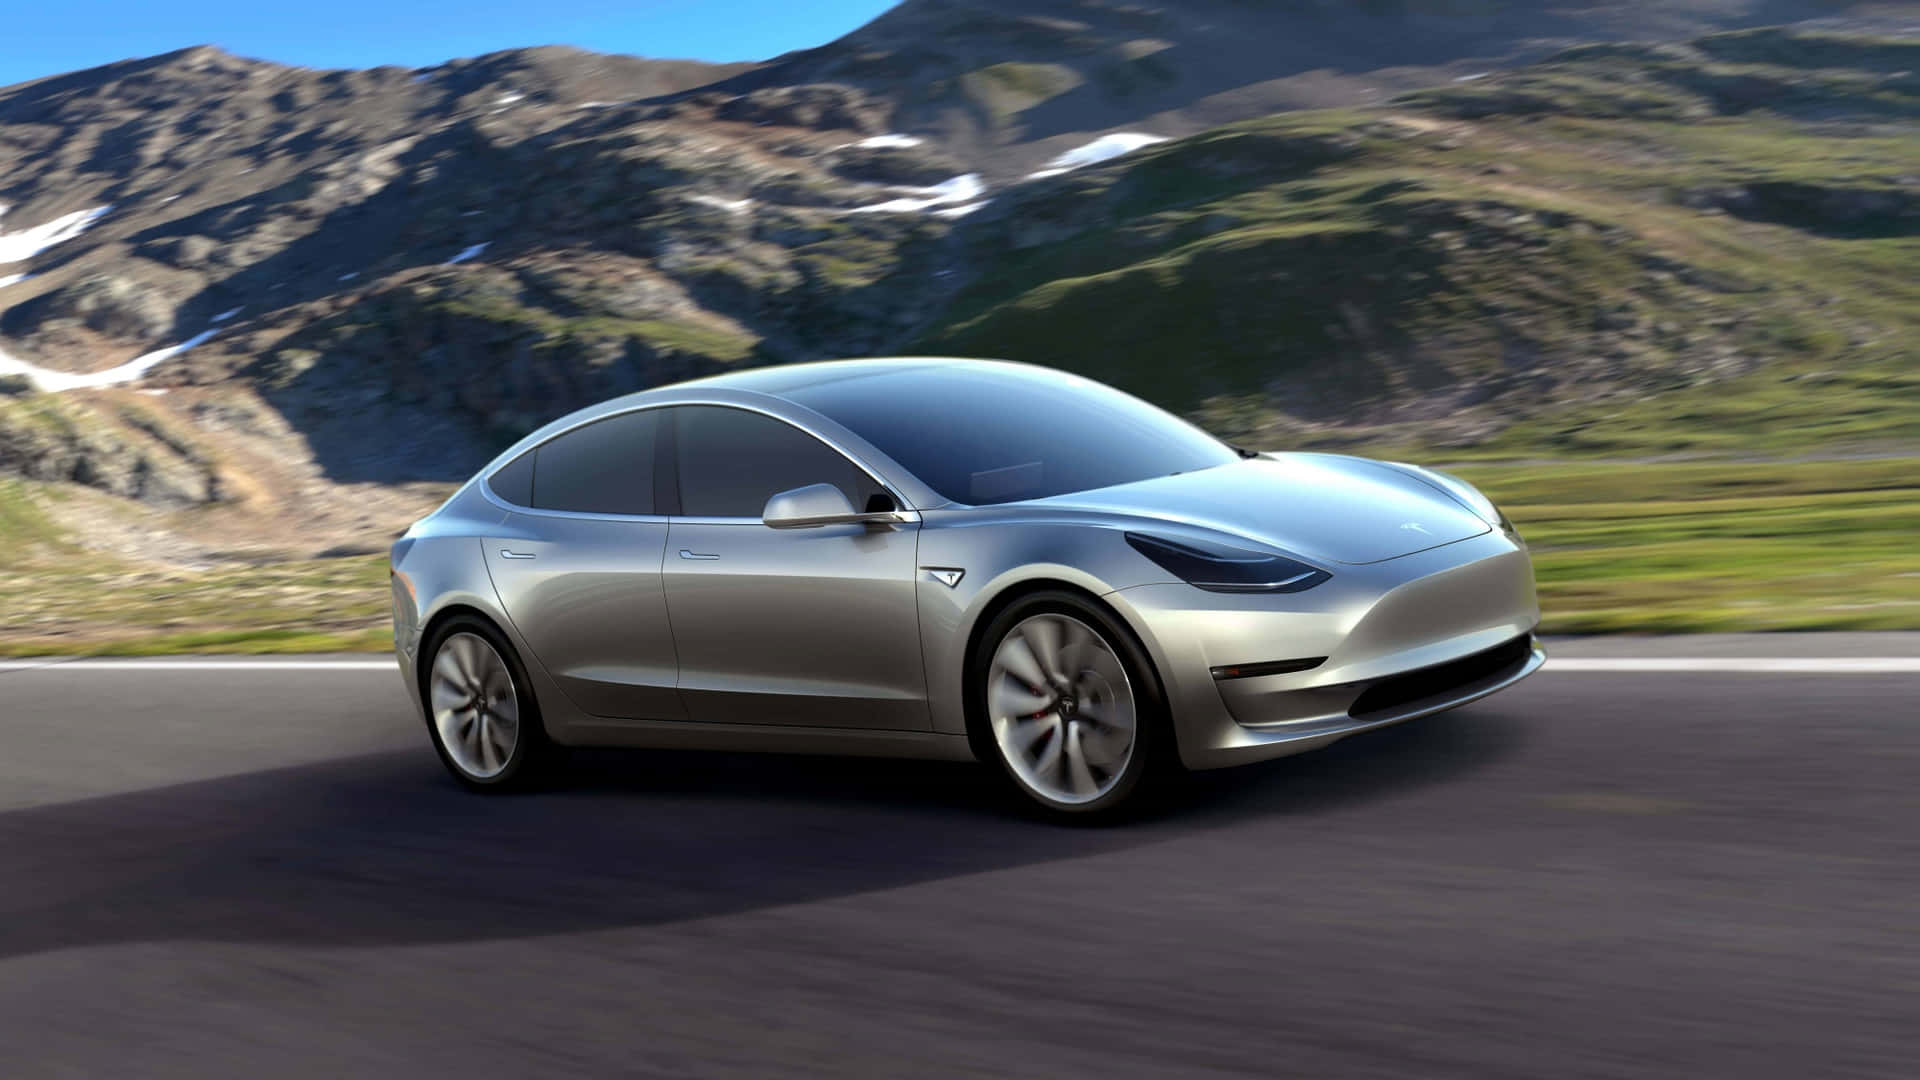 Experience Luxury Mobility with the Tesla Model 3